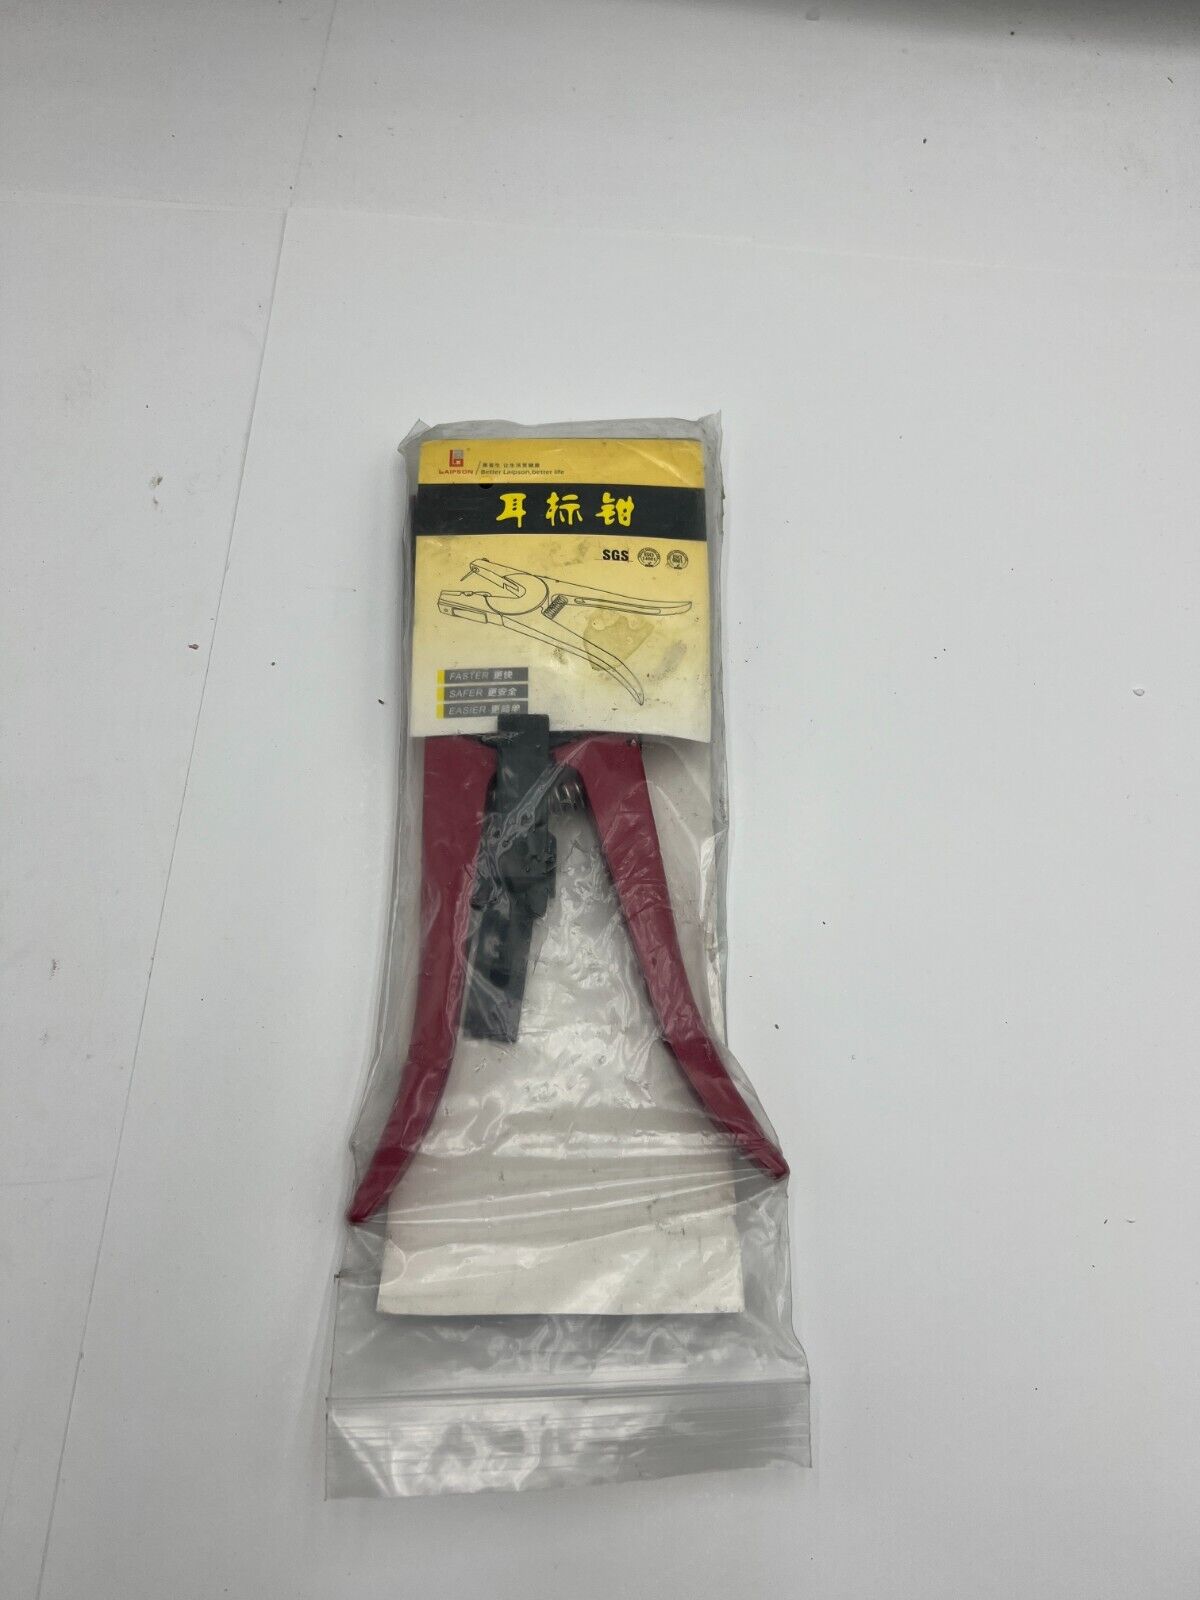 LAIPSON 471000 VETERINARY EAR TAG APPLICATOR EAR TAG PLIERS RED - FAST SHIPPING